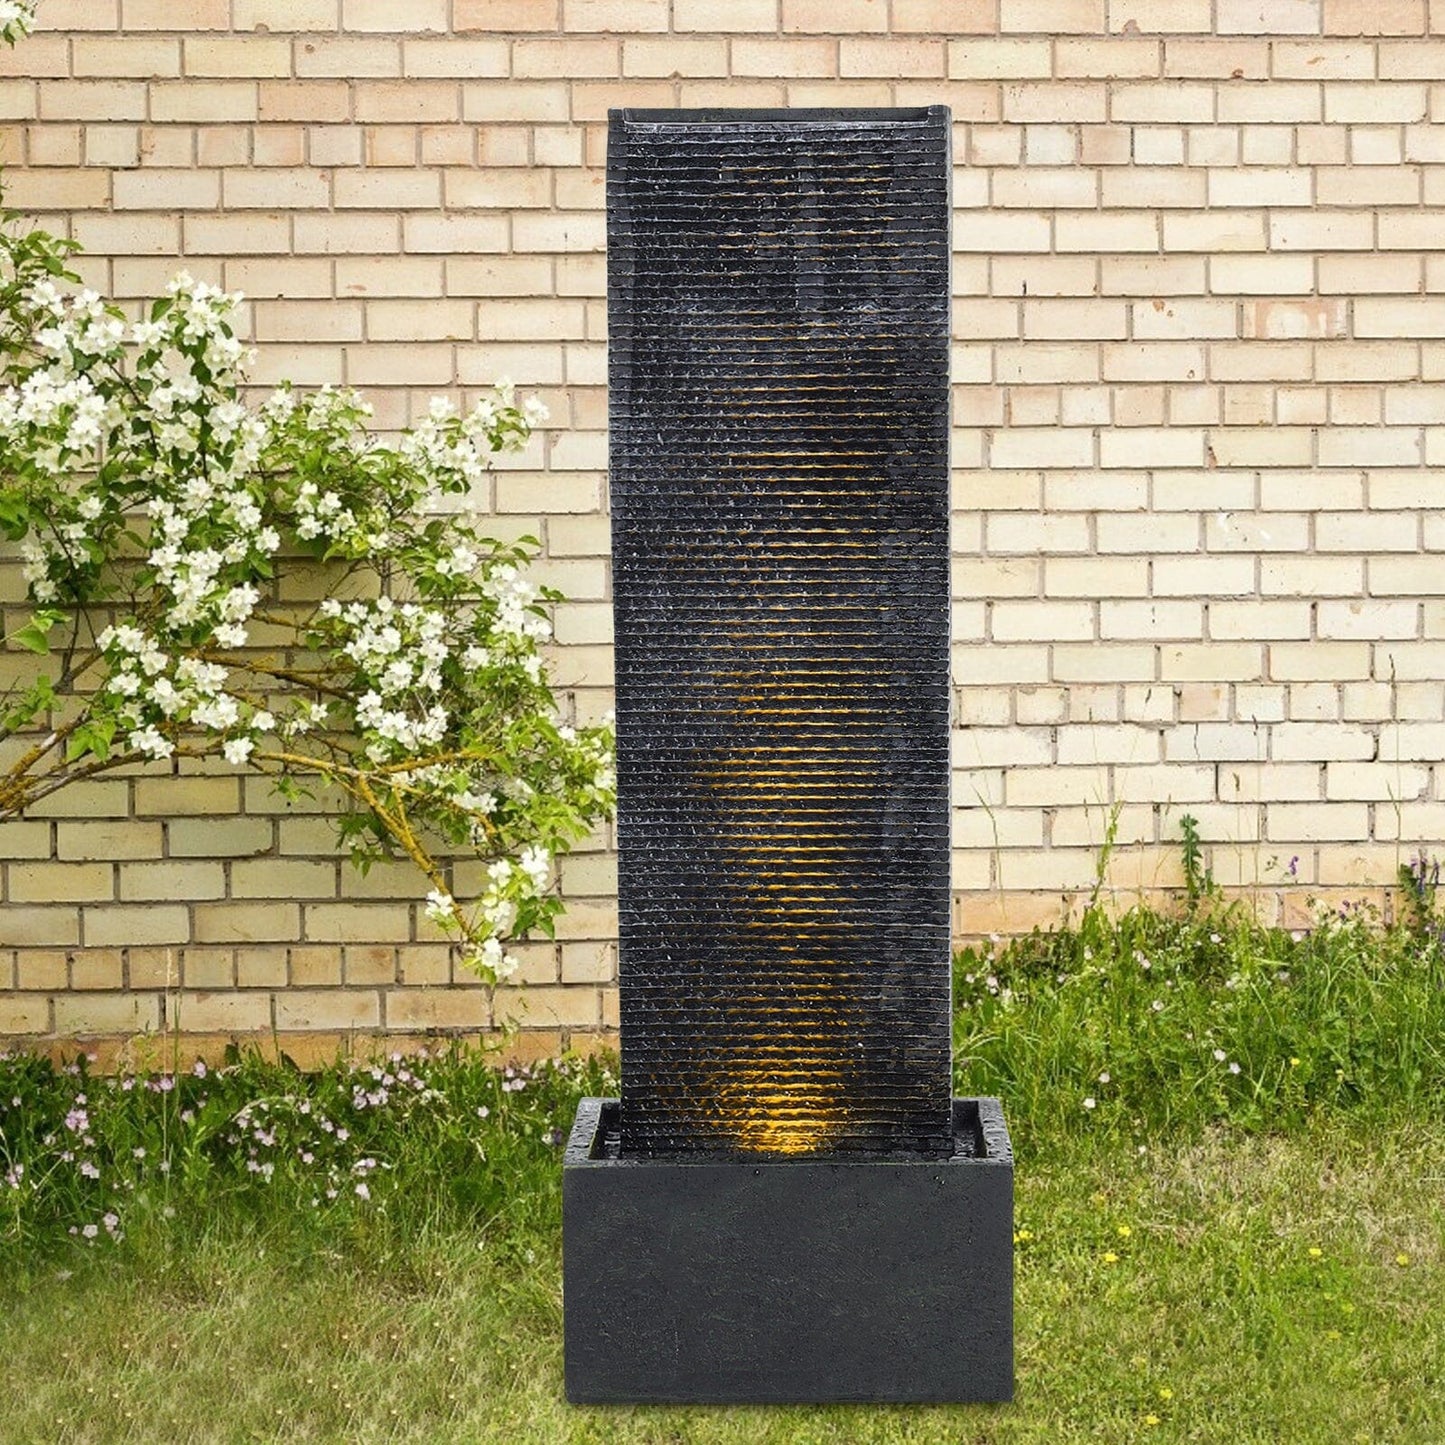 98cm H Black Rectangle Waterfall Stone Look Water Fountain with LED Light